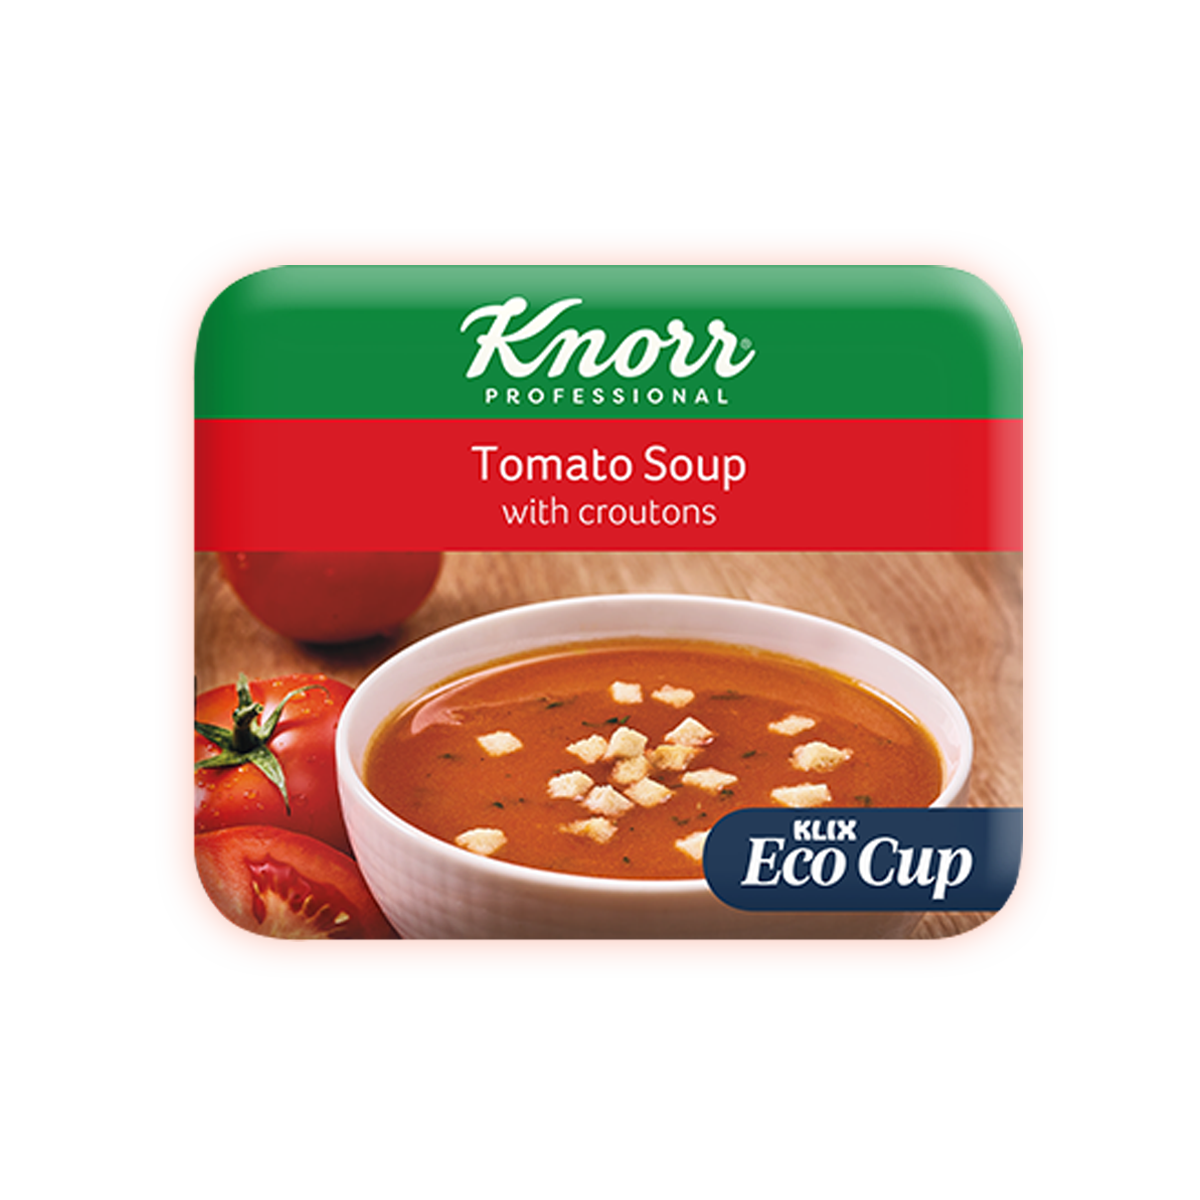 Knorr Tomato Soup with Croutons 7oz - 48457